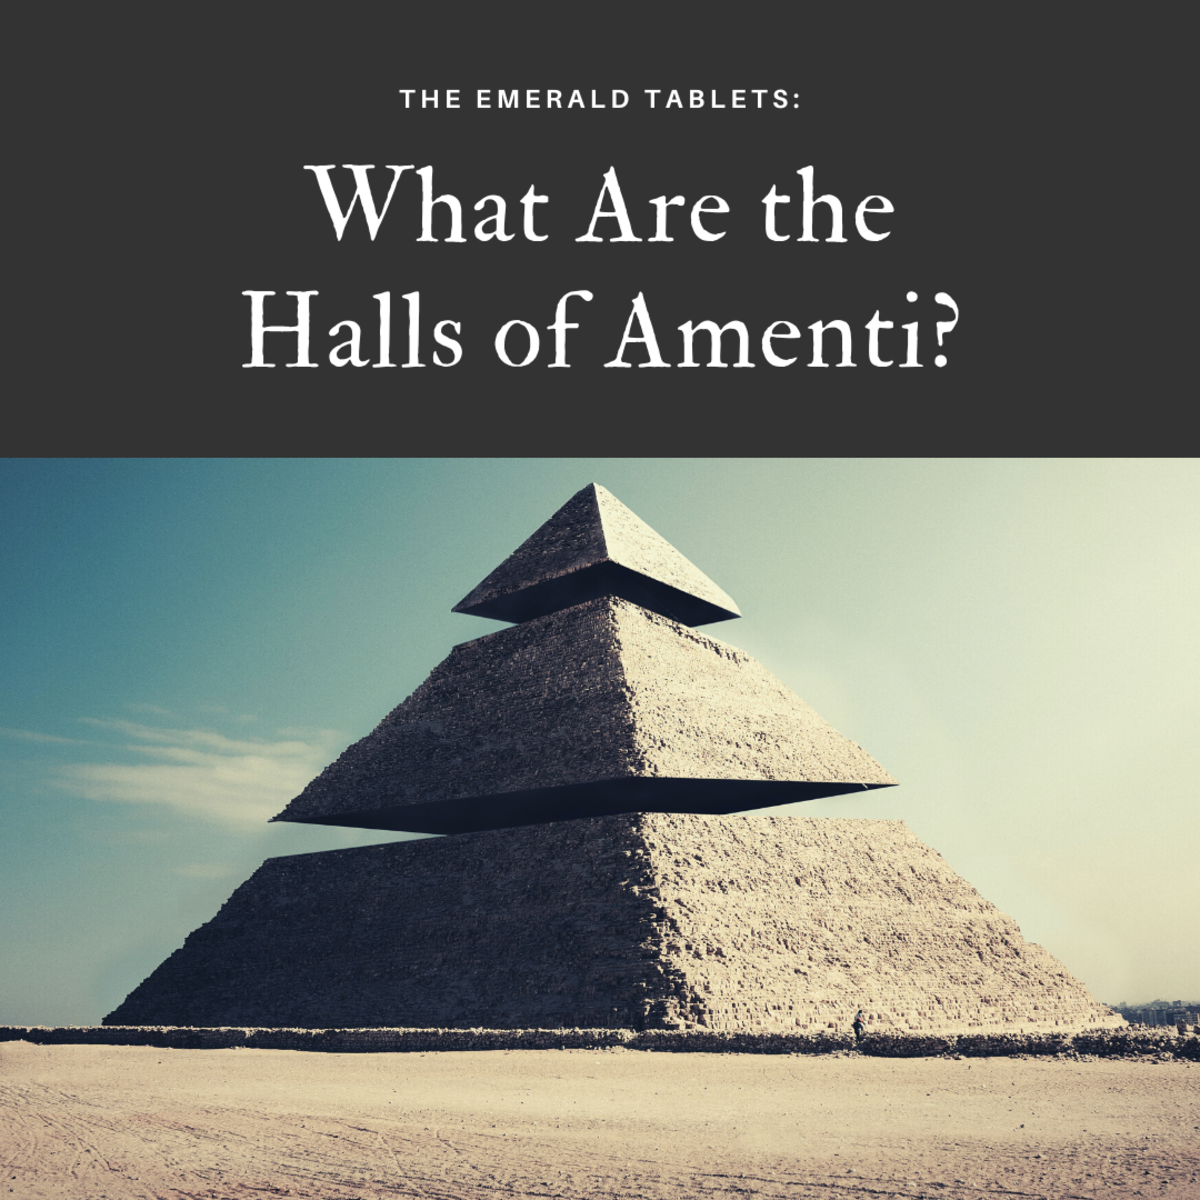 The Halls of Amenti are between the highest and lowest dimensions, distorting the only Truth that exists in the Universe.